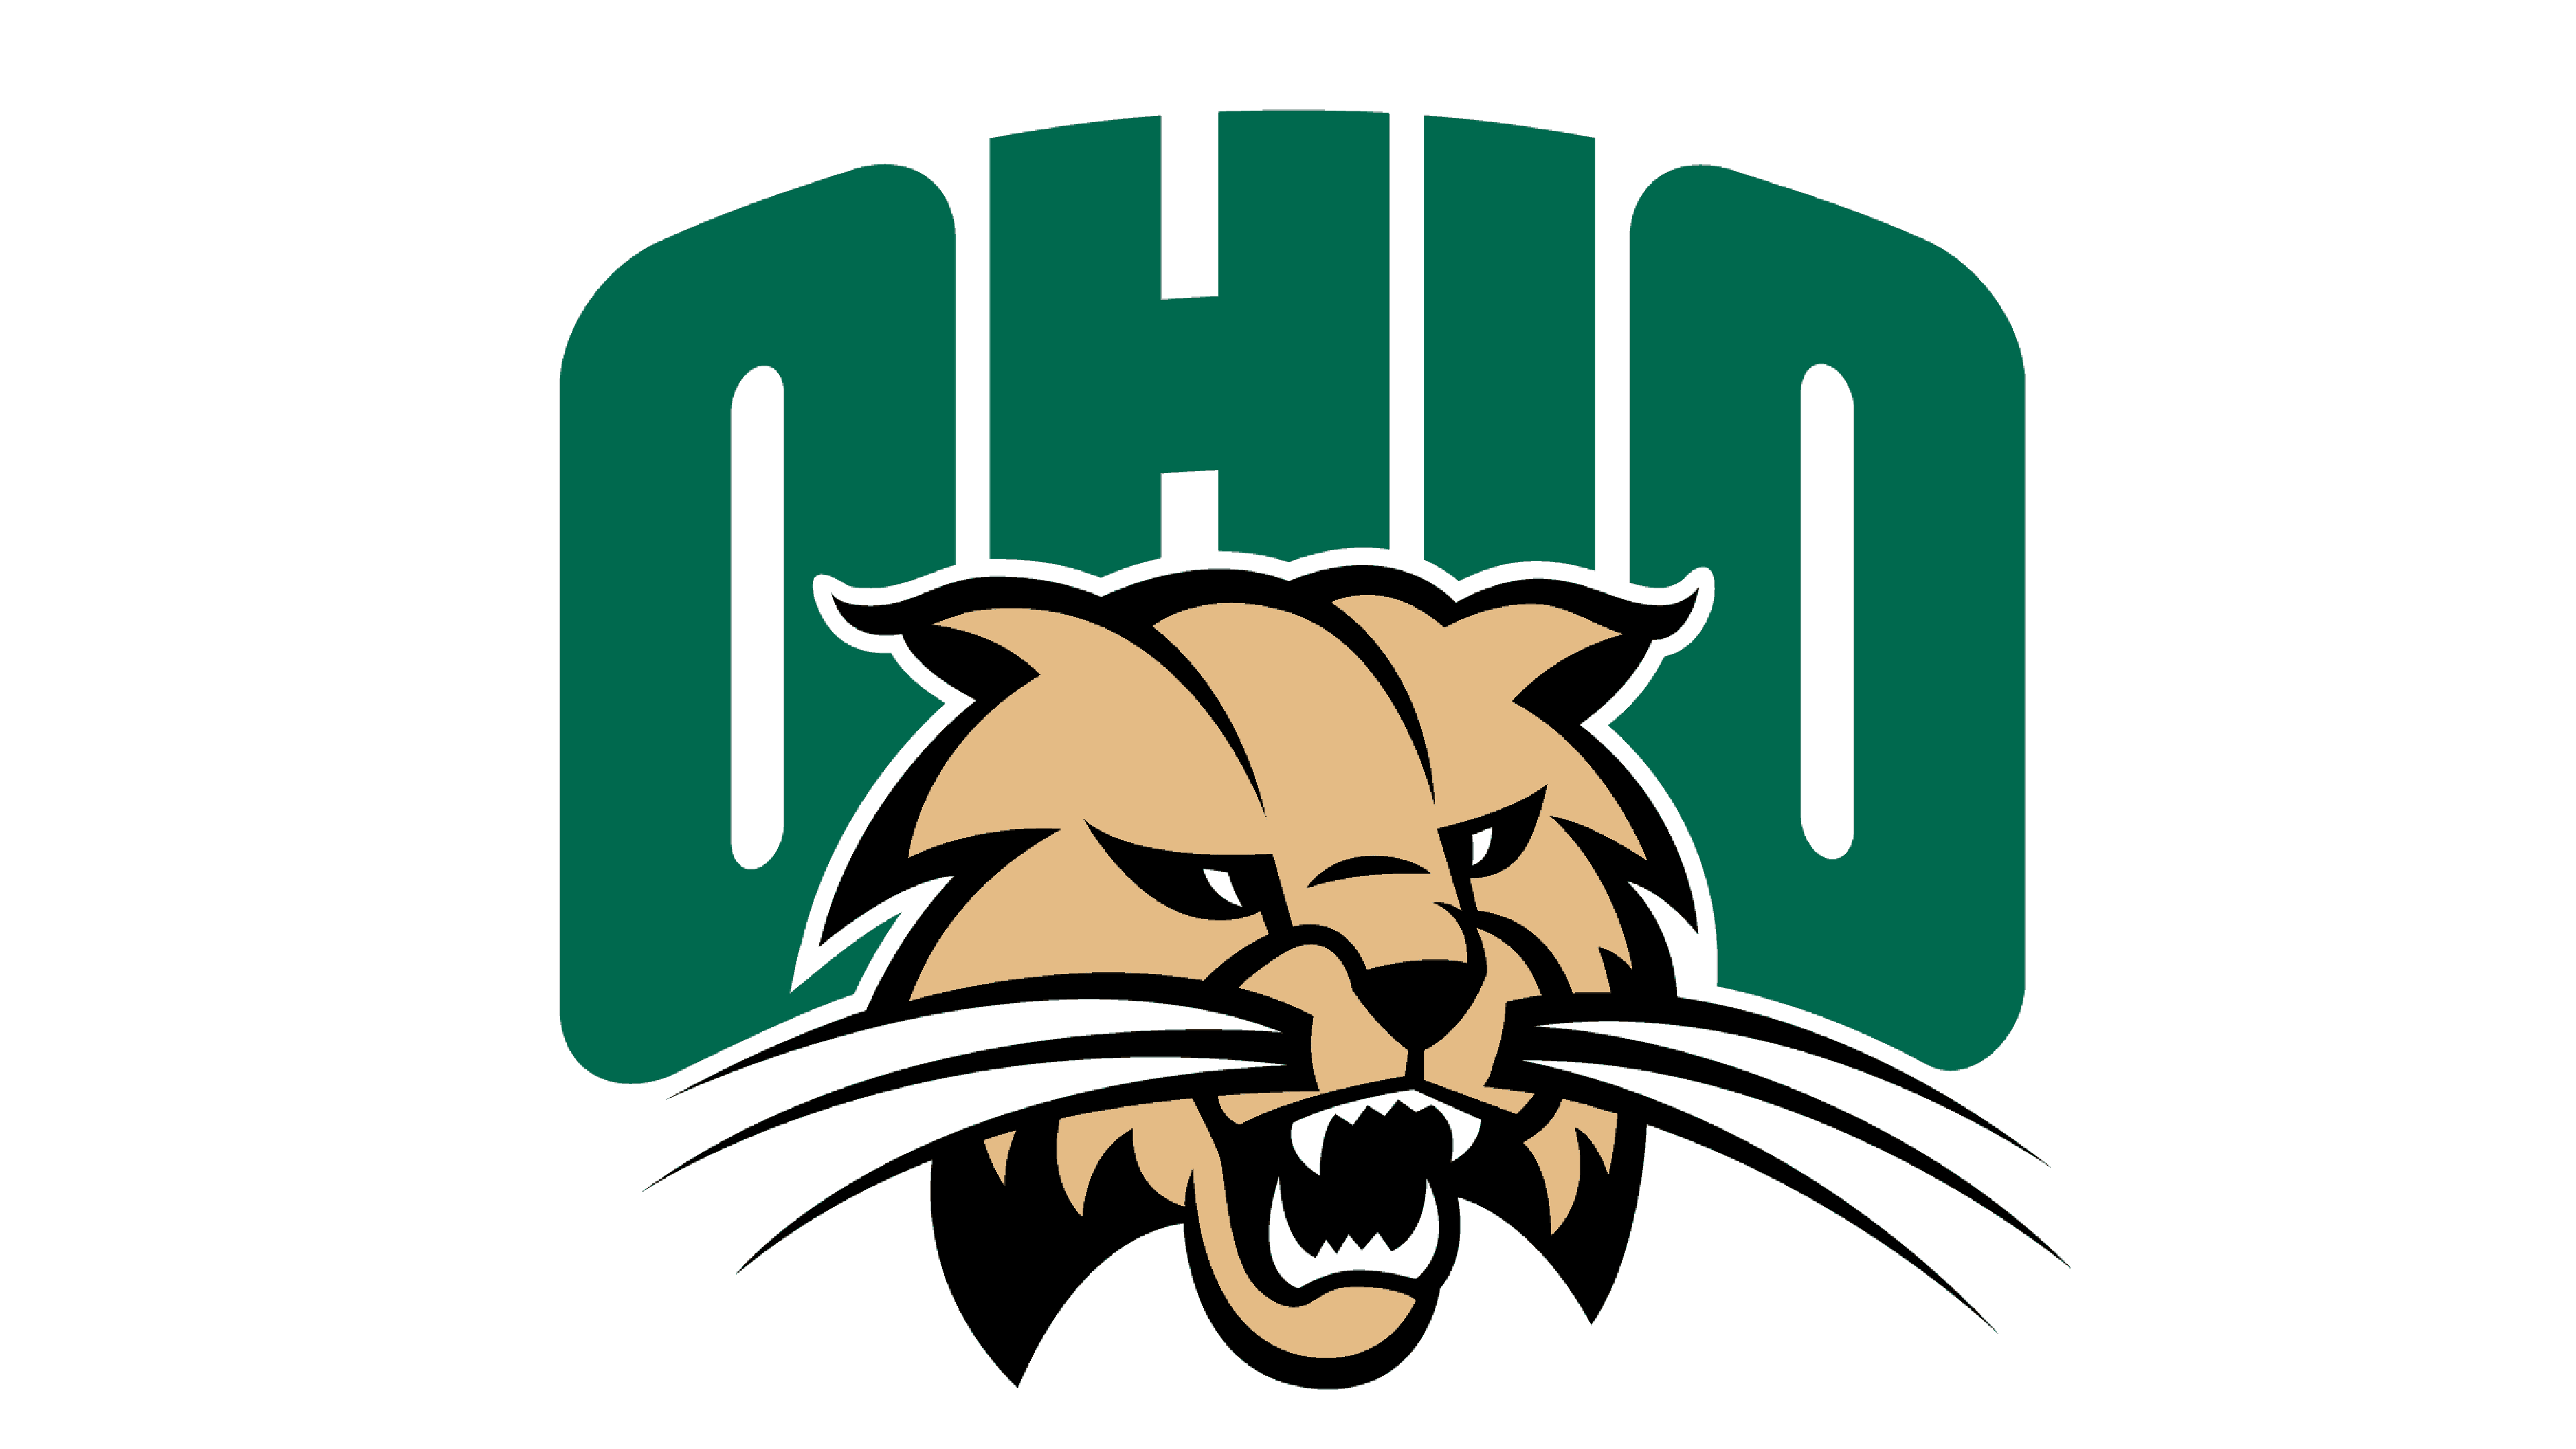 Ohio University Nail Art: Show Your Bobcat Pride with These Designs - wide 6